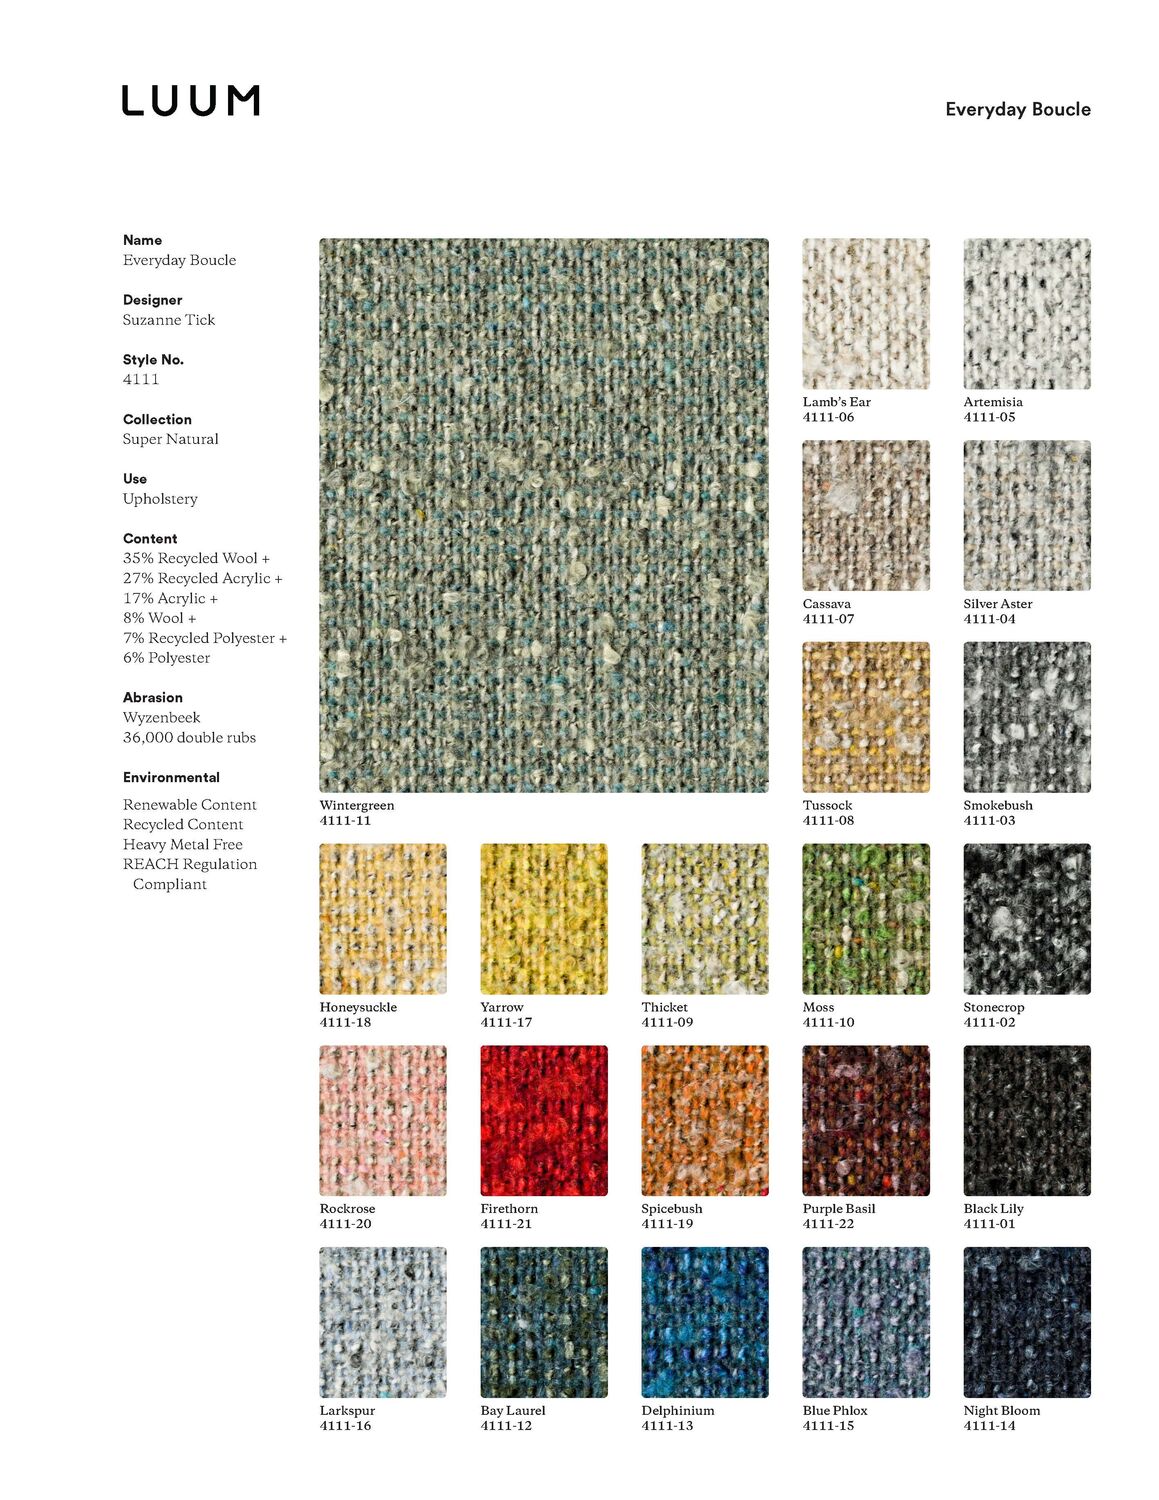 Everyday Boucle - Tussock - 4111 - 08 Sample Card